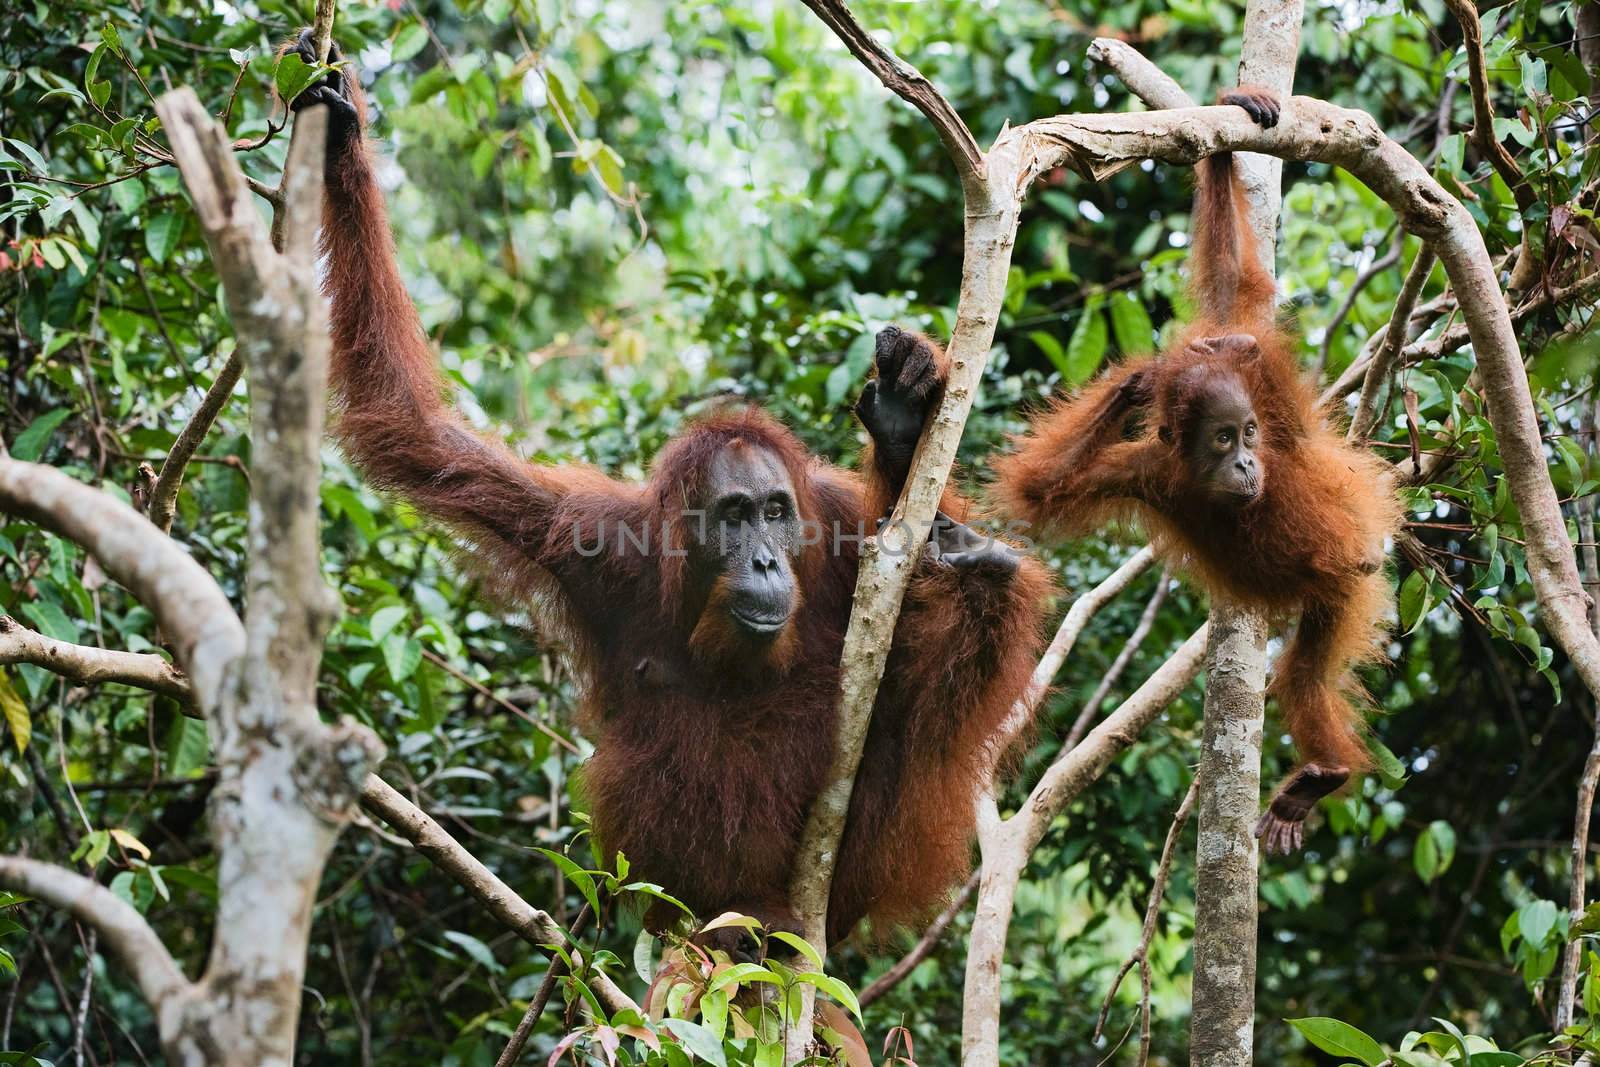 Female the orangutan with the kid in branches of trees by SURZ